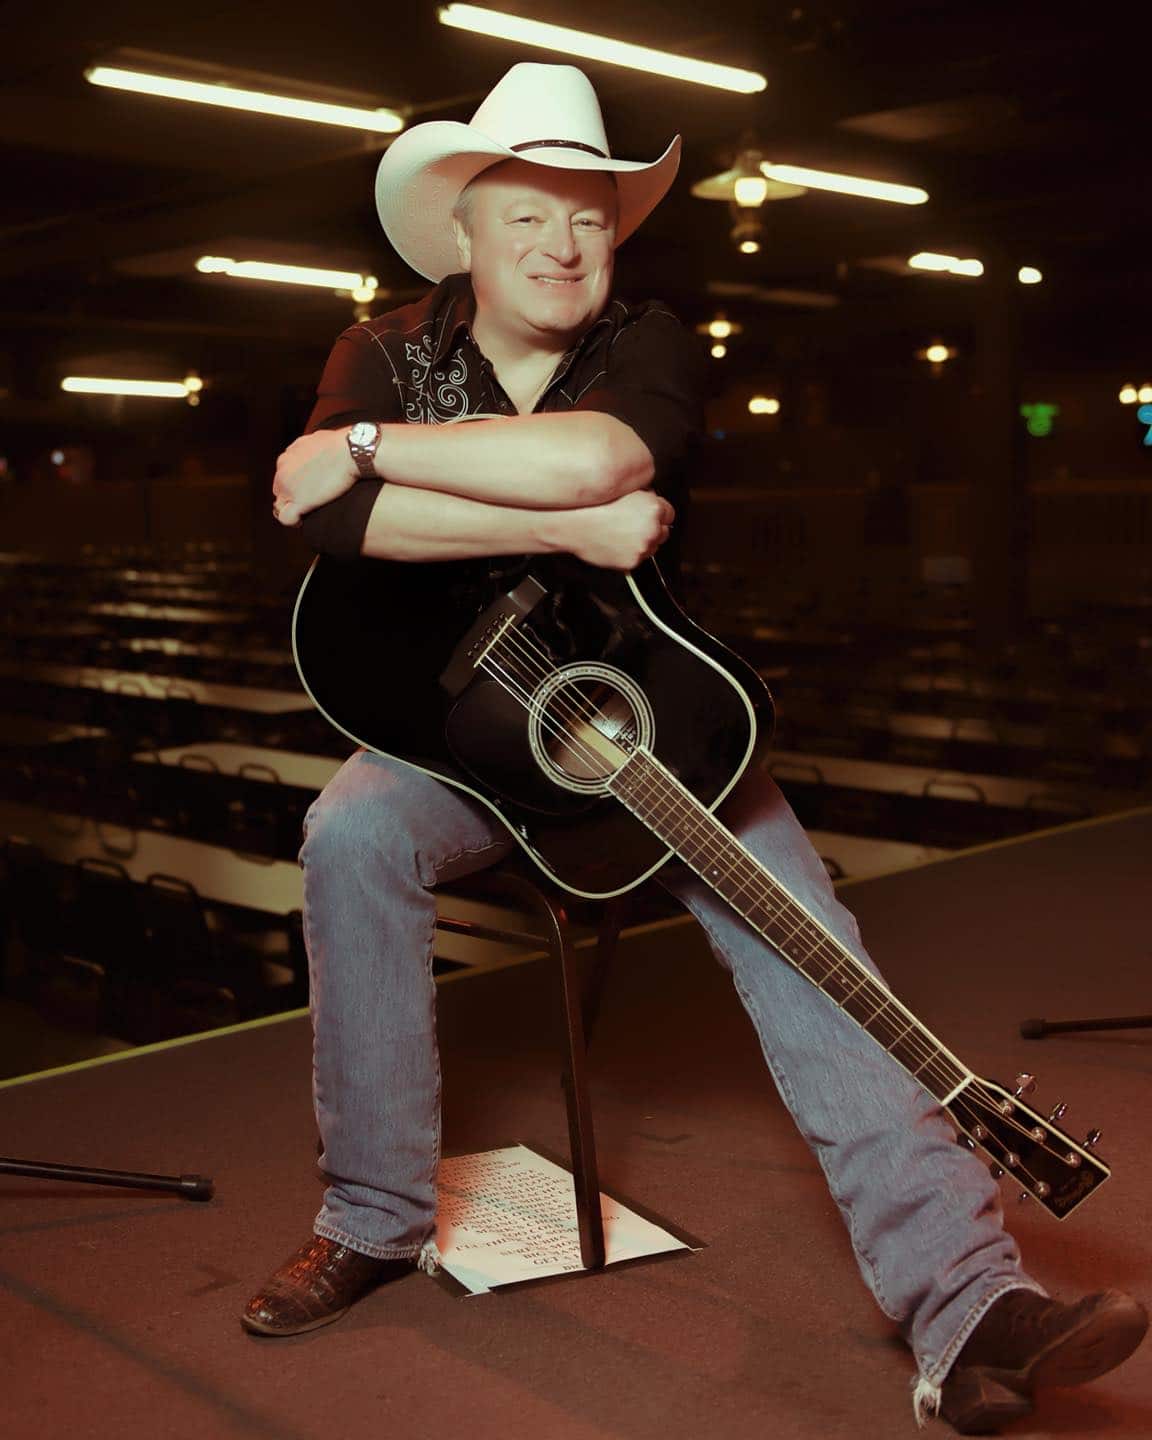 Mark Chesnutt is also from Texas